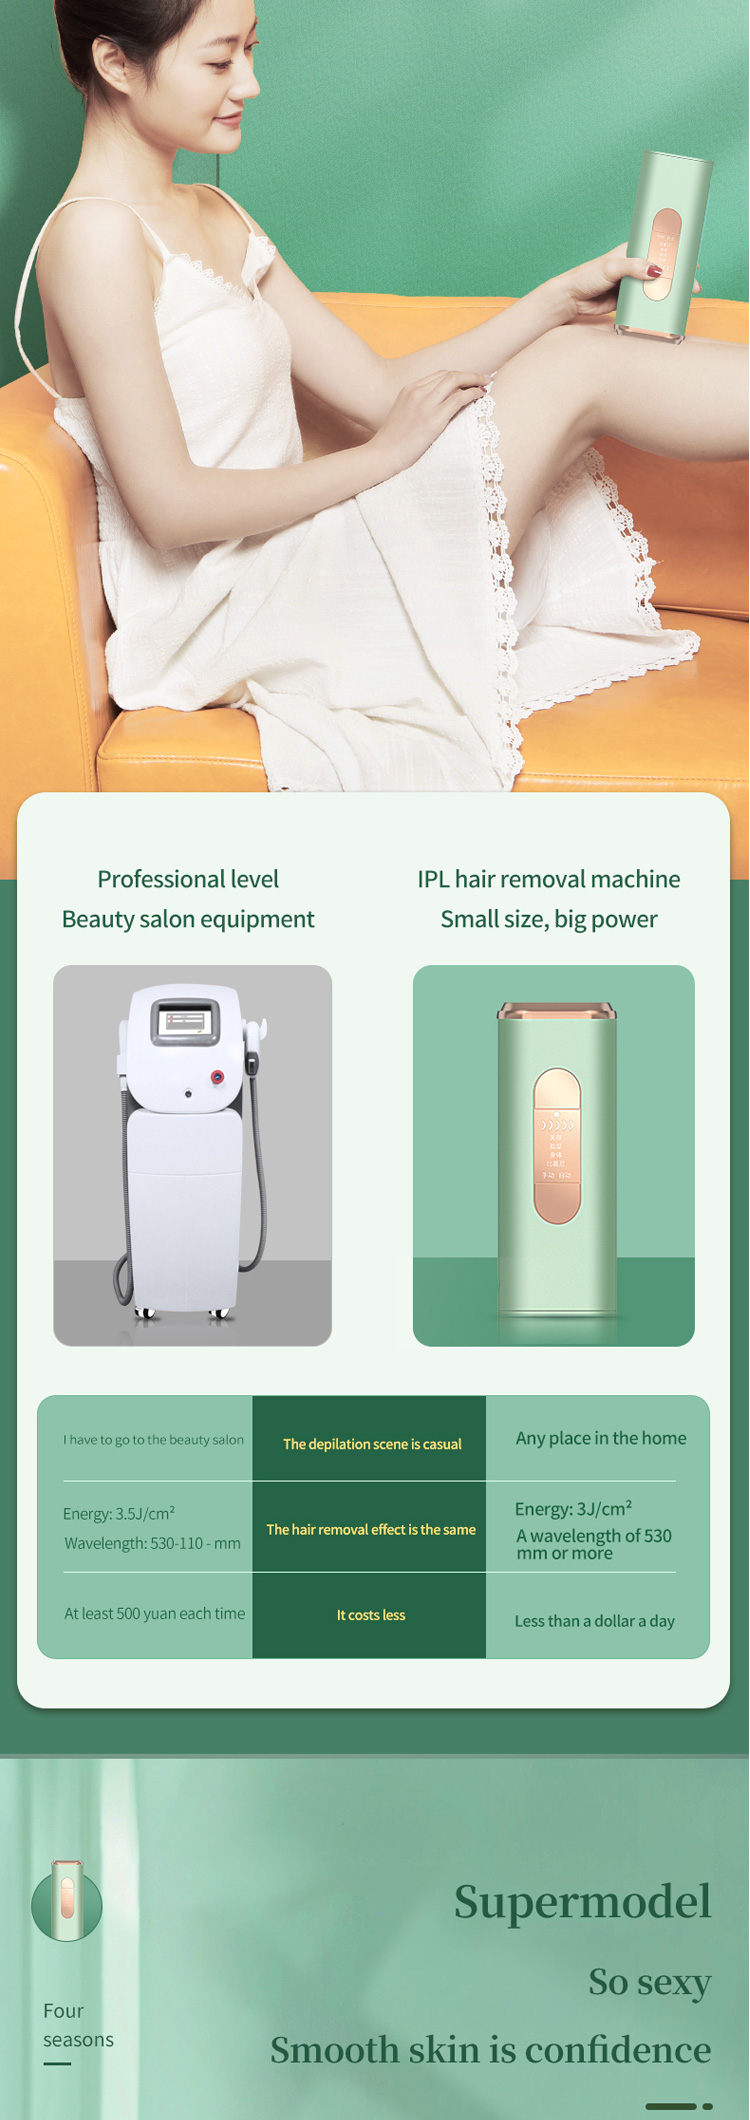 T61 IPL hair removal